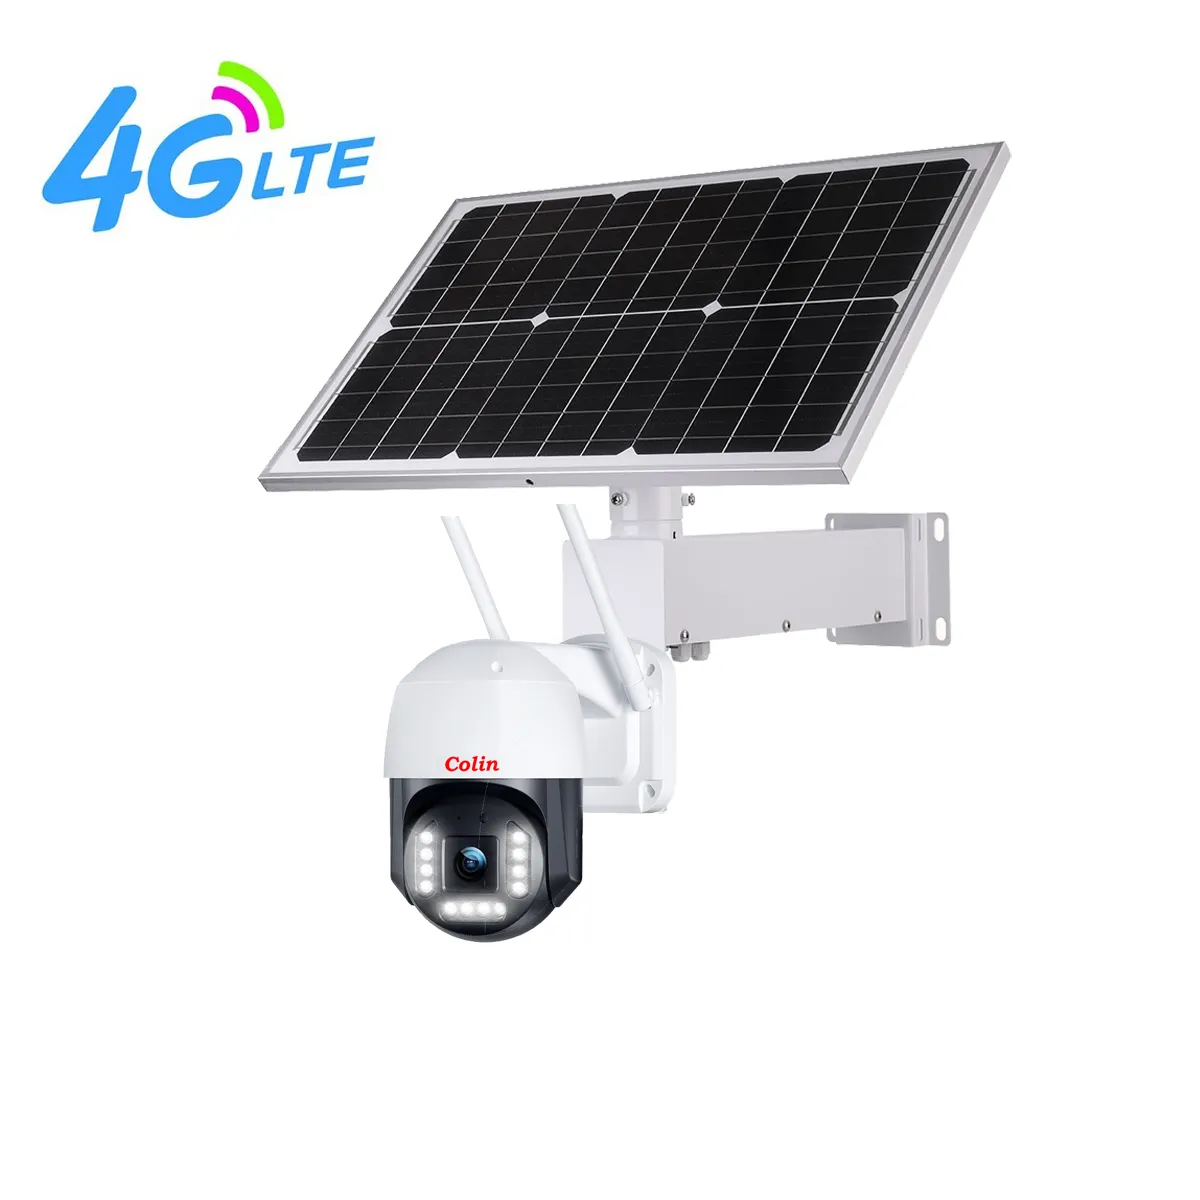 Real 40W Real 20AH first hand battery outdoor 8mp 4g solar camera with sony imx415 chip sensor europe version 4G surveillance